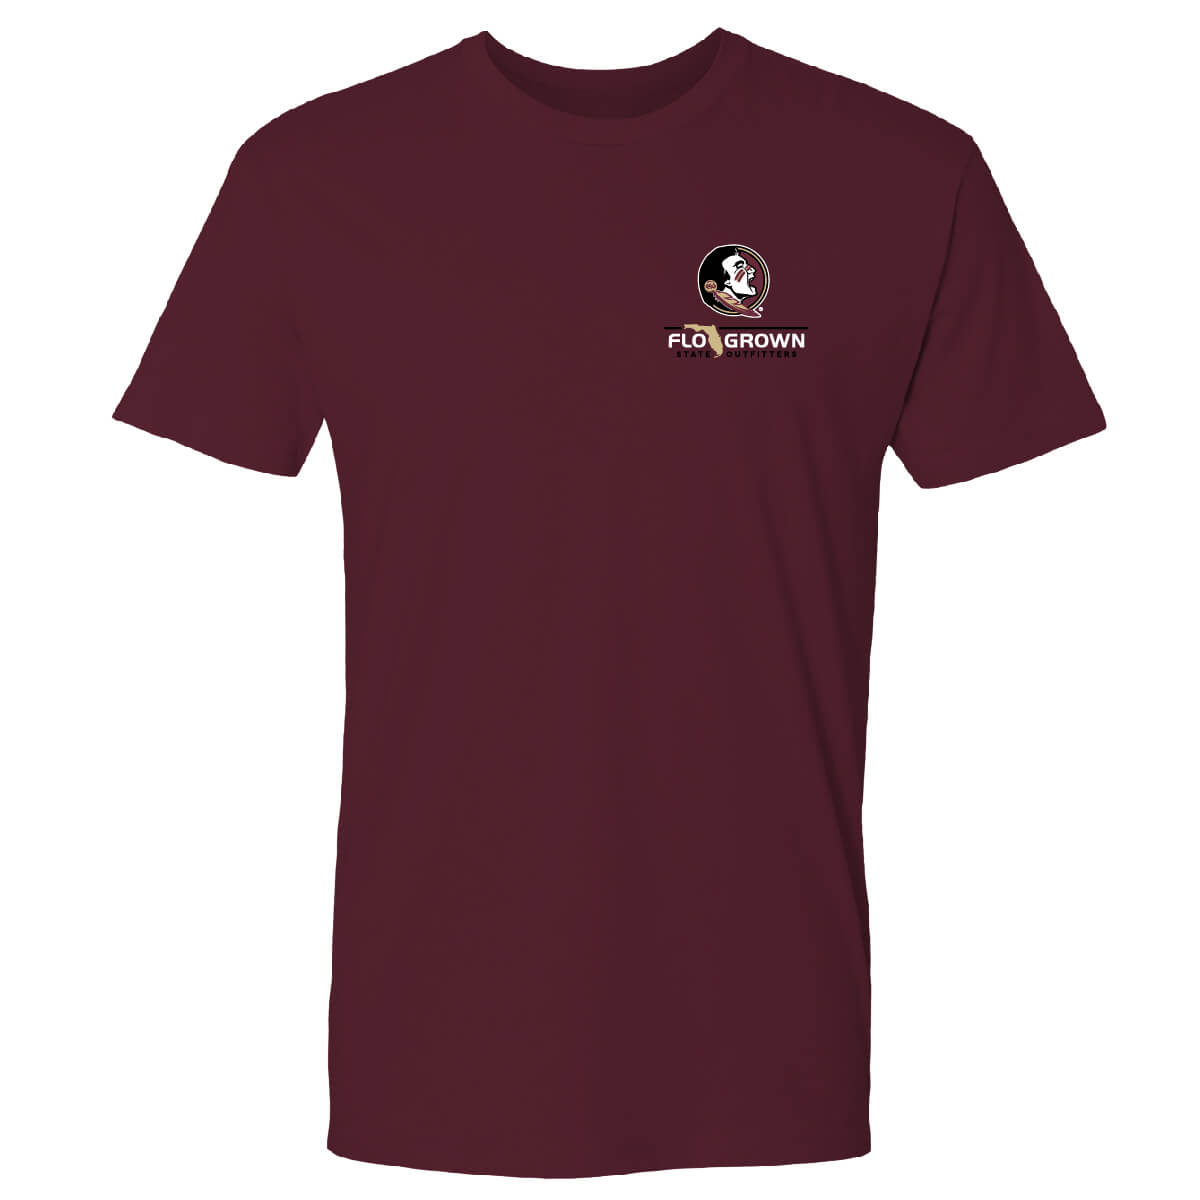 Florida State Seminoles Old Time Outfitters Tee